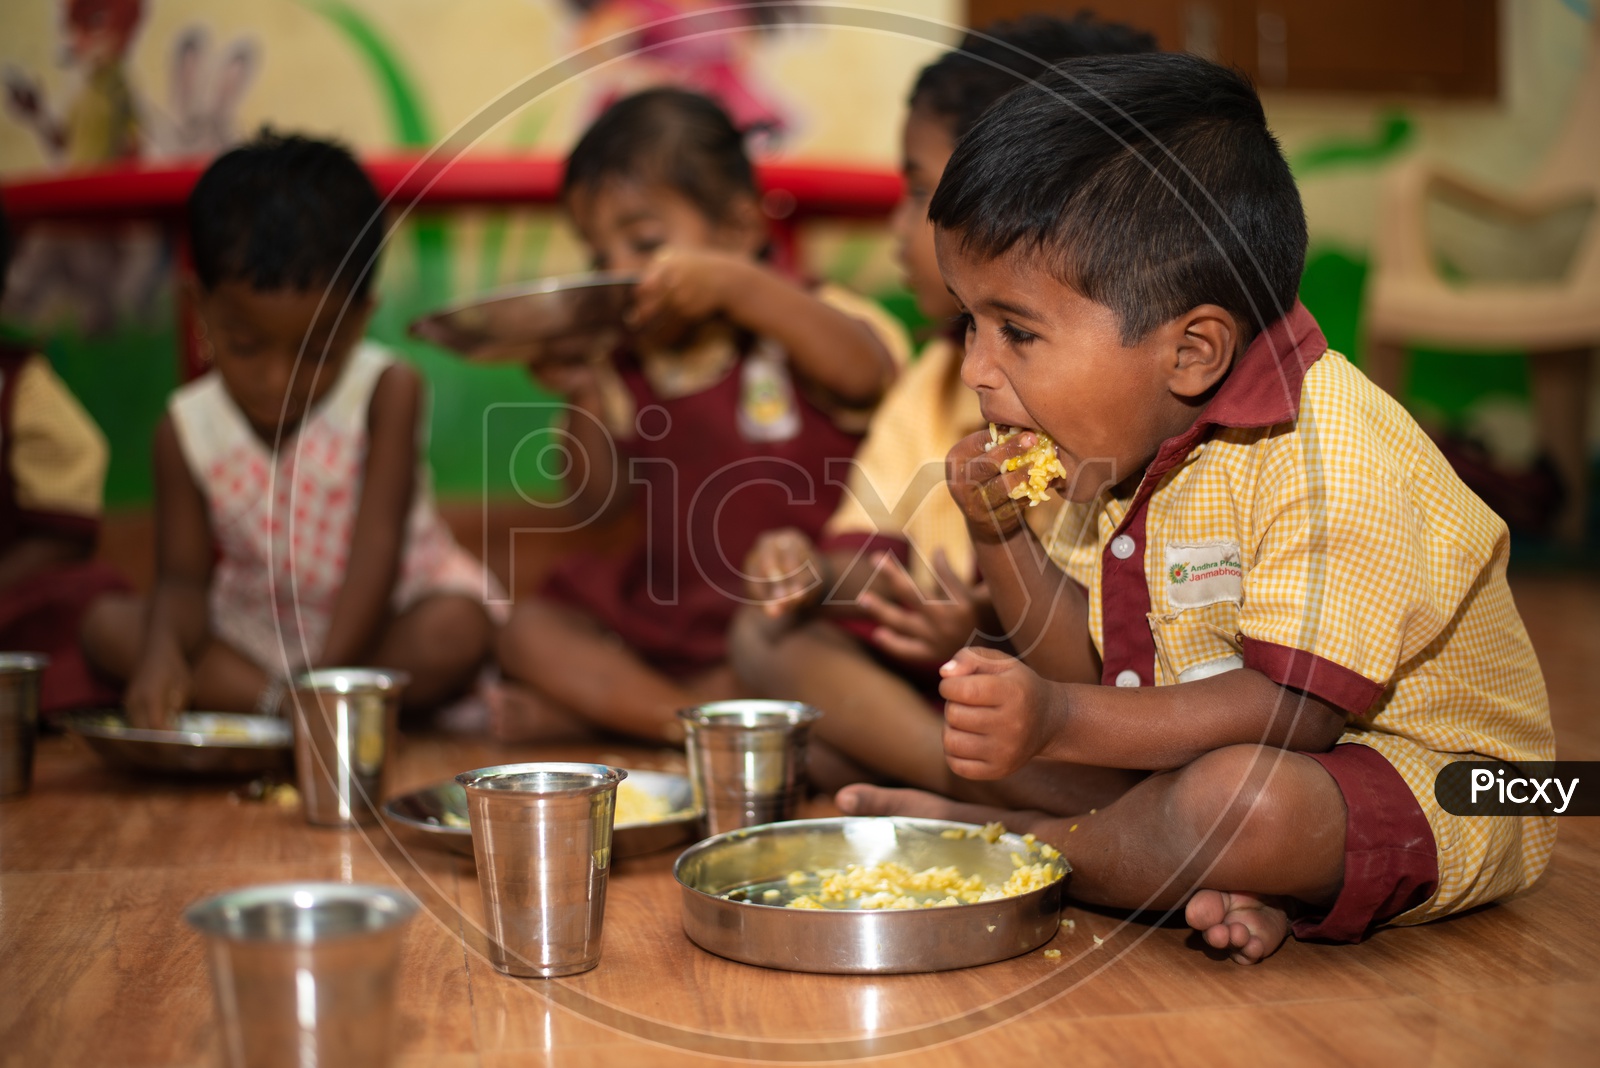 Students eating their mid day meal in an Anganwadi center